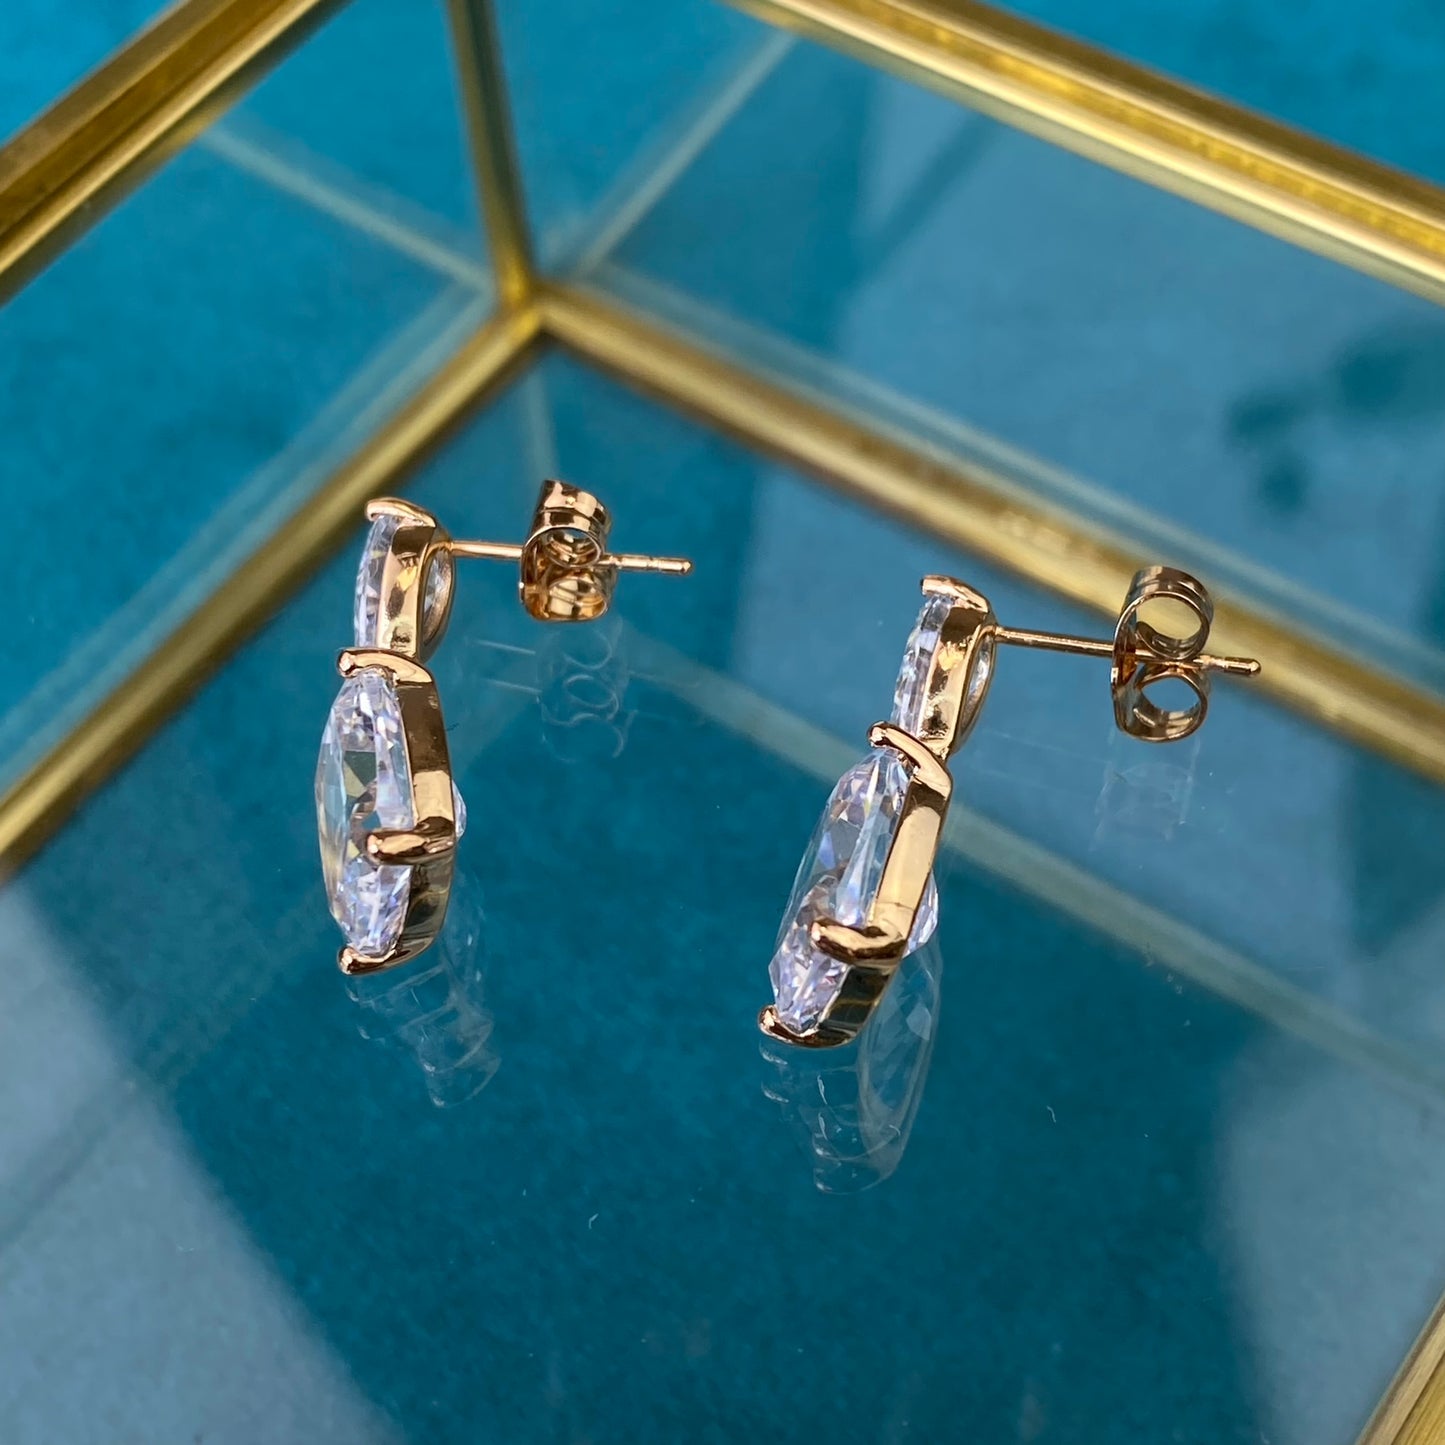 Gold Plated Stainless Steel Earrings with decorative crystals